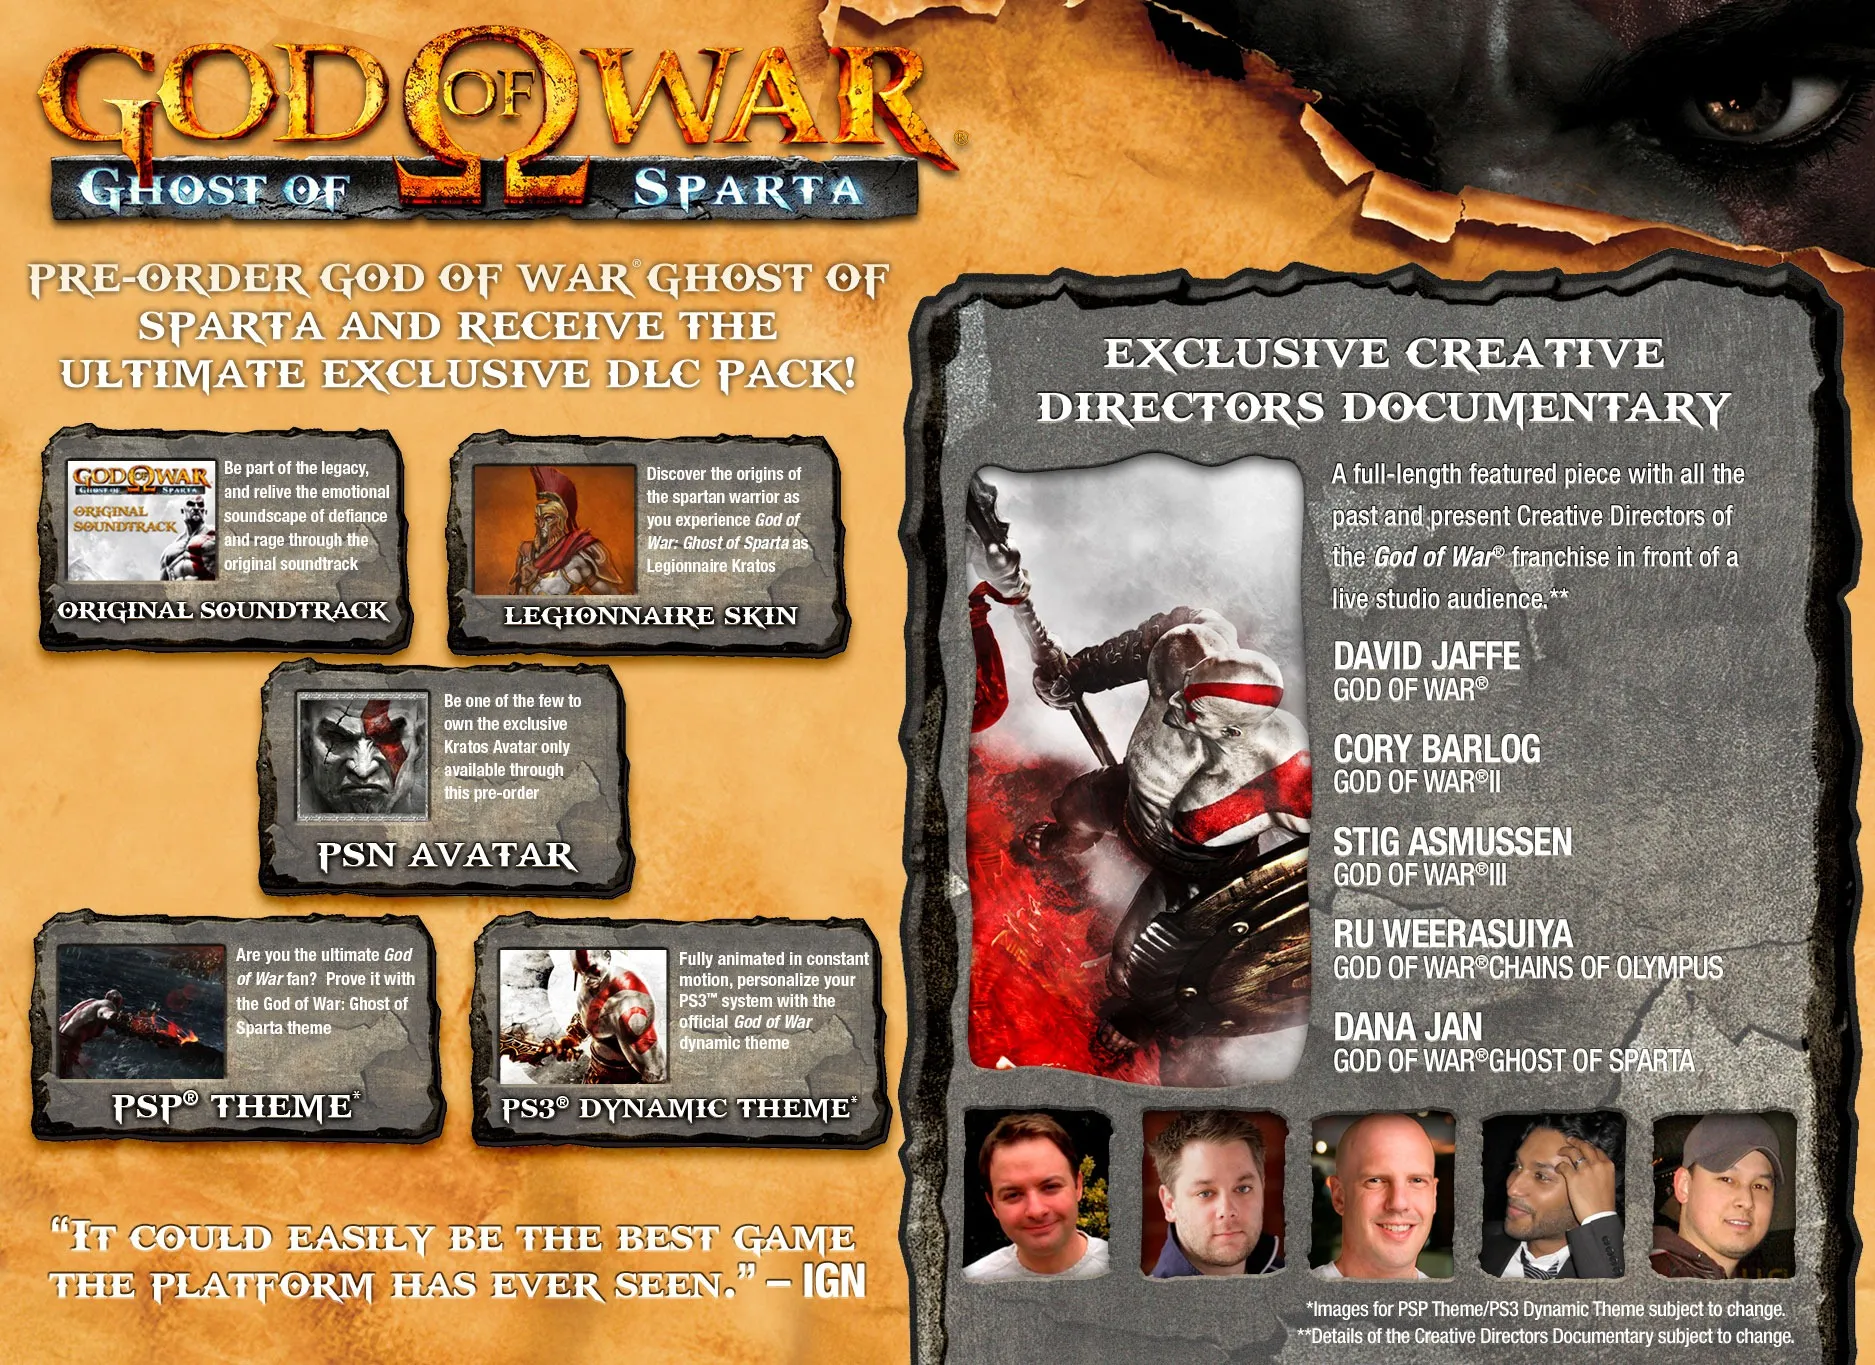 God of War: Ghost of Sparta Coming to PSP in 2010